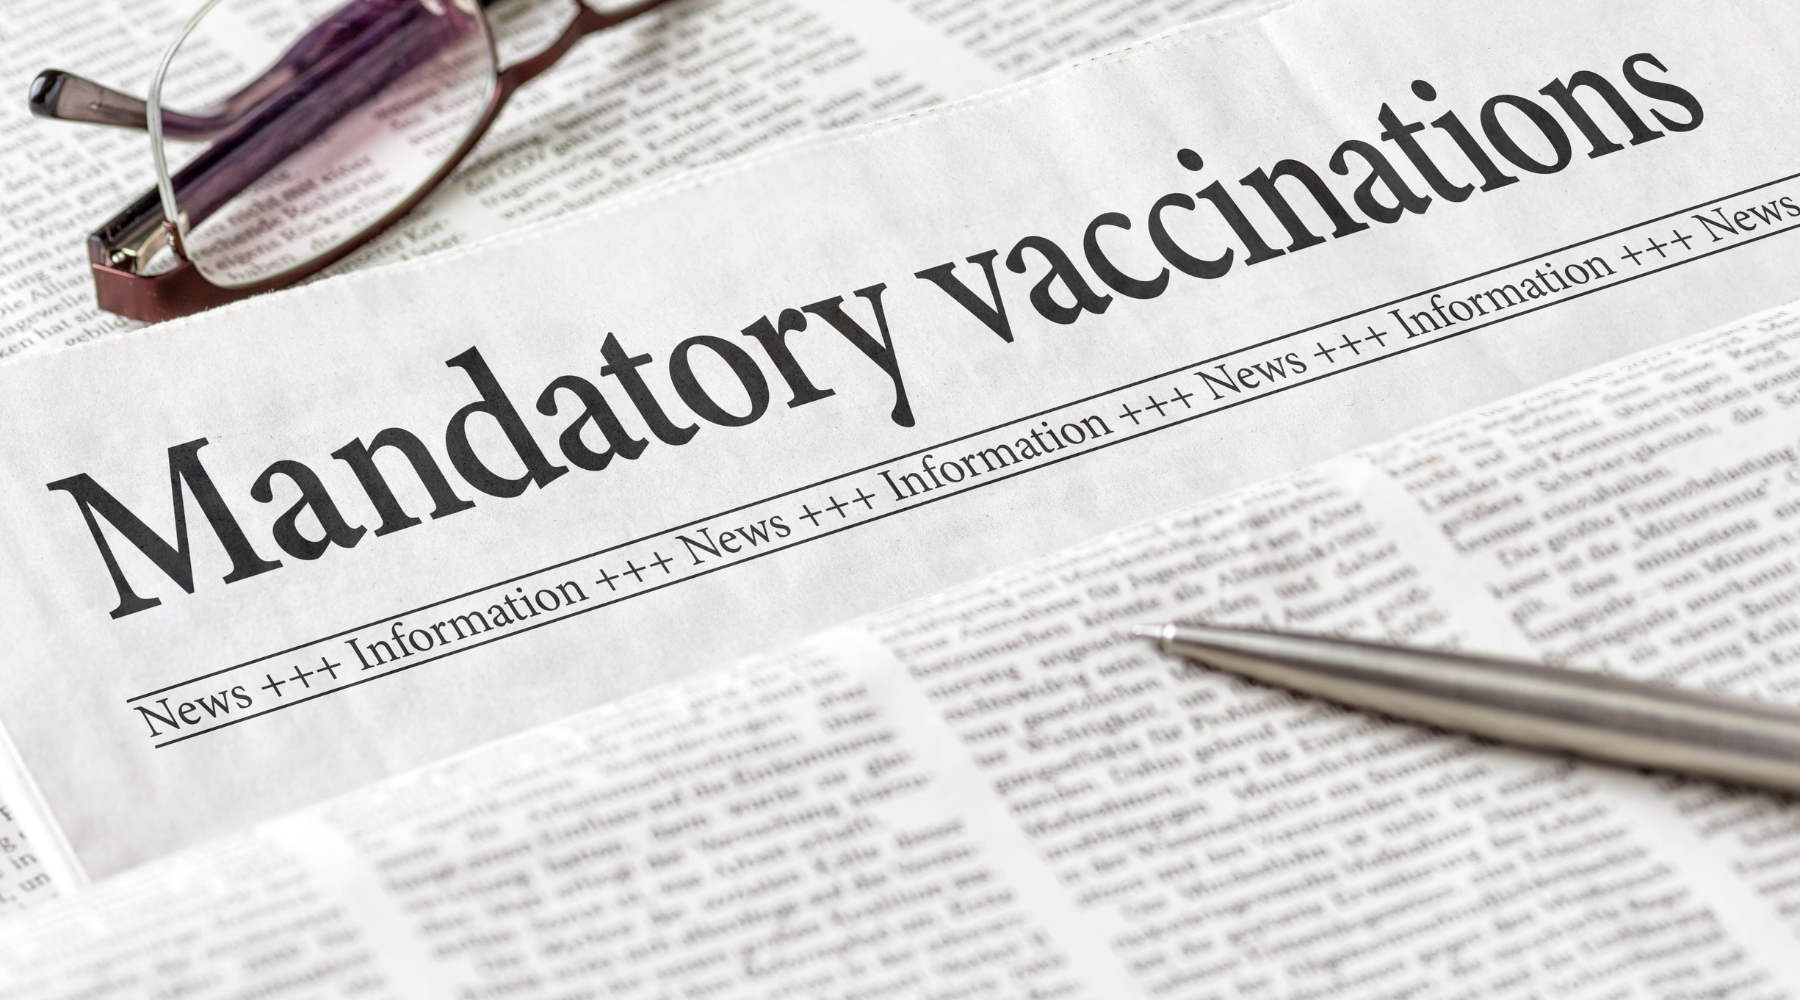 Ontario Court Declines Judicial Review of Mandatory Vaccination Policies, Indicating HRTO is the Proper Forum